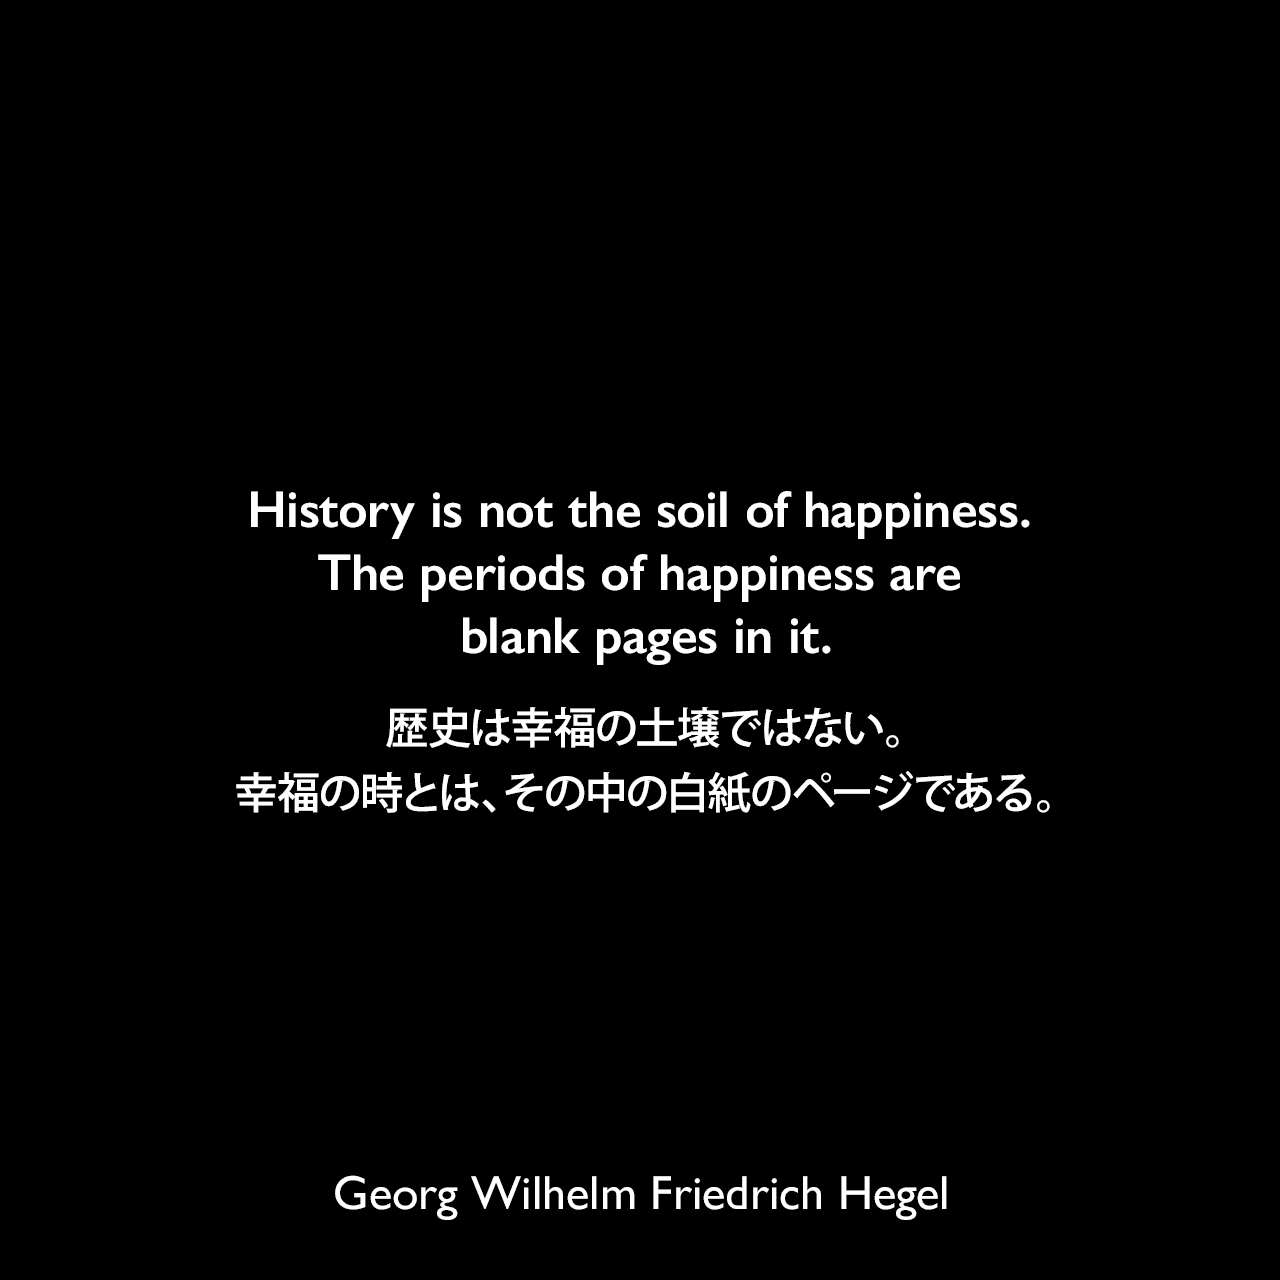 History is not the soil of happiness. The periods of happiness are blank pages in it.歴史は幸福の土壌ではない。幸福の時とは、その中の白紙のページである。- ヘーゲルによる本「Lectures on the Philosophy of History」よりGeorg Wilhelm Friedrich Hegel